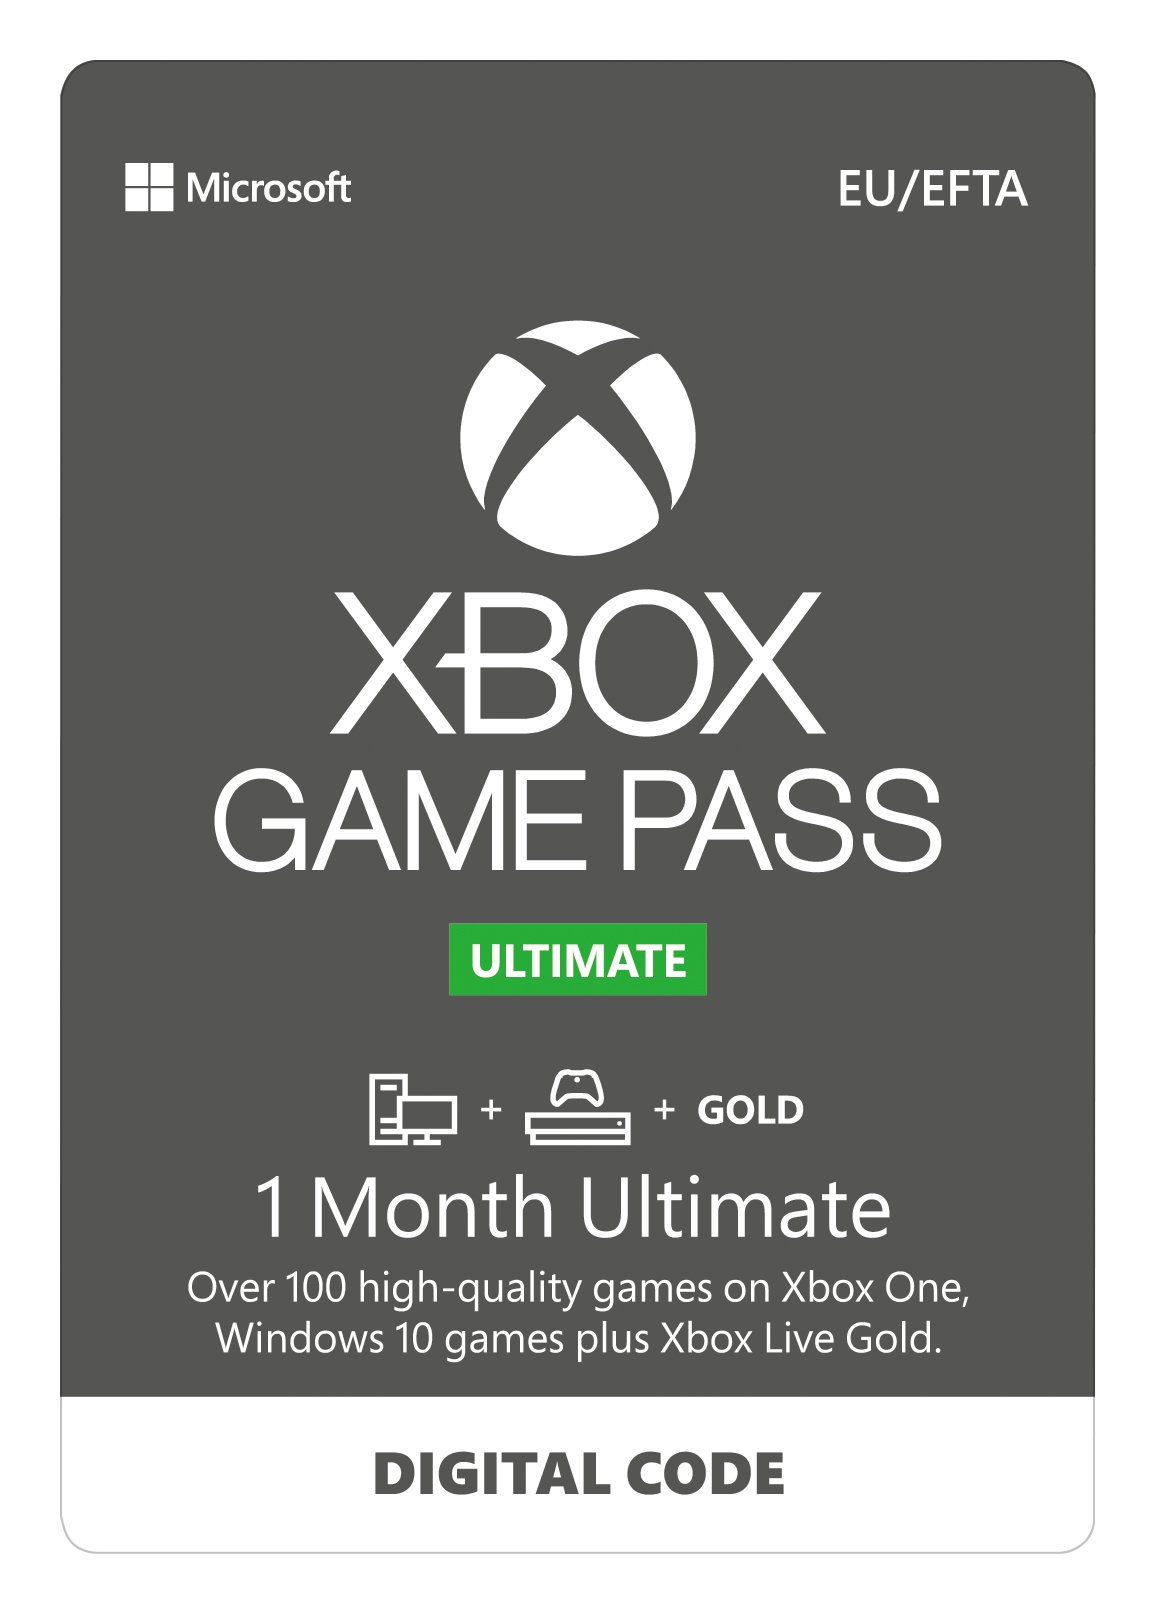 what is the monthly cost for xbox game pass ultimate